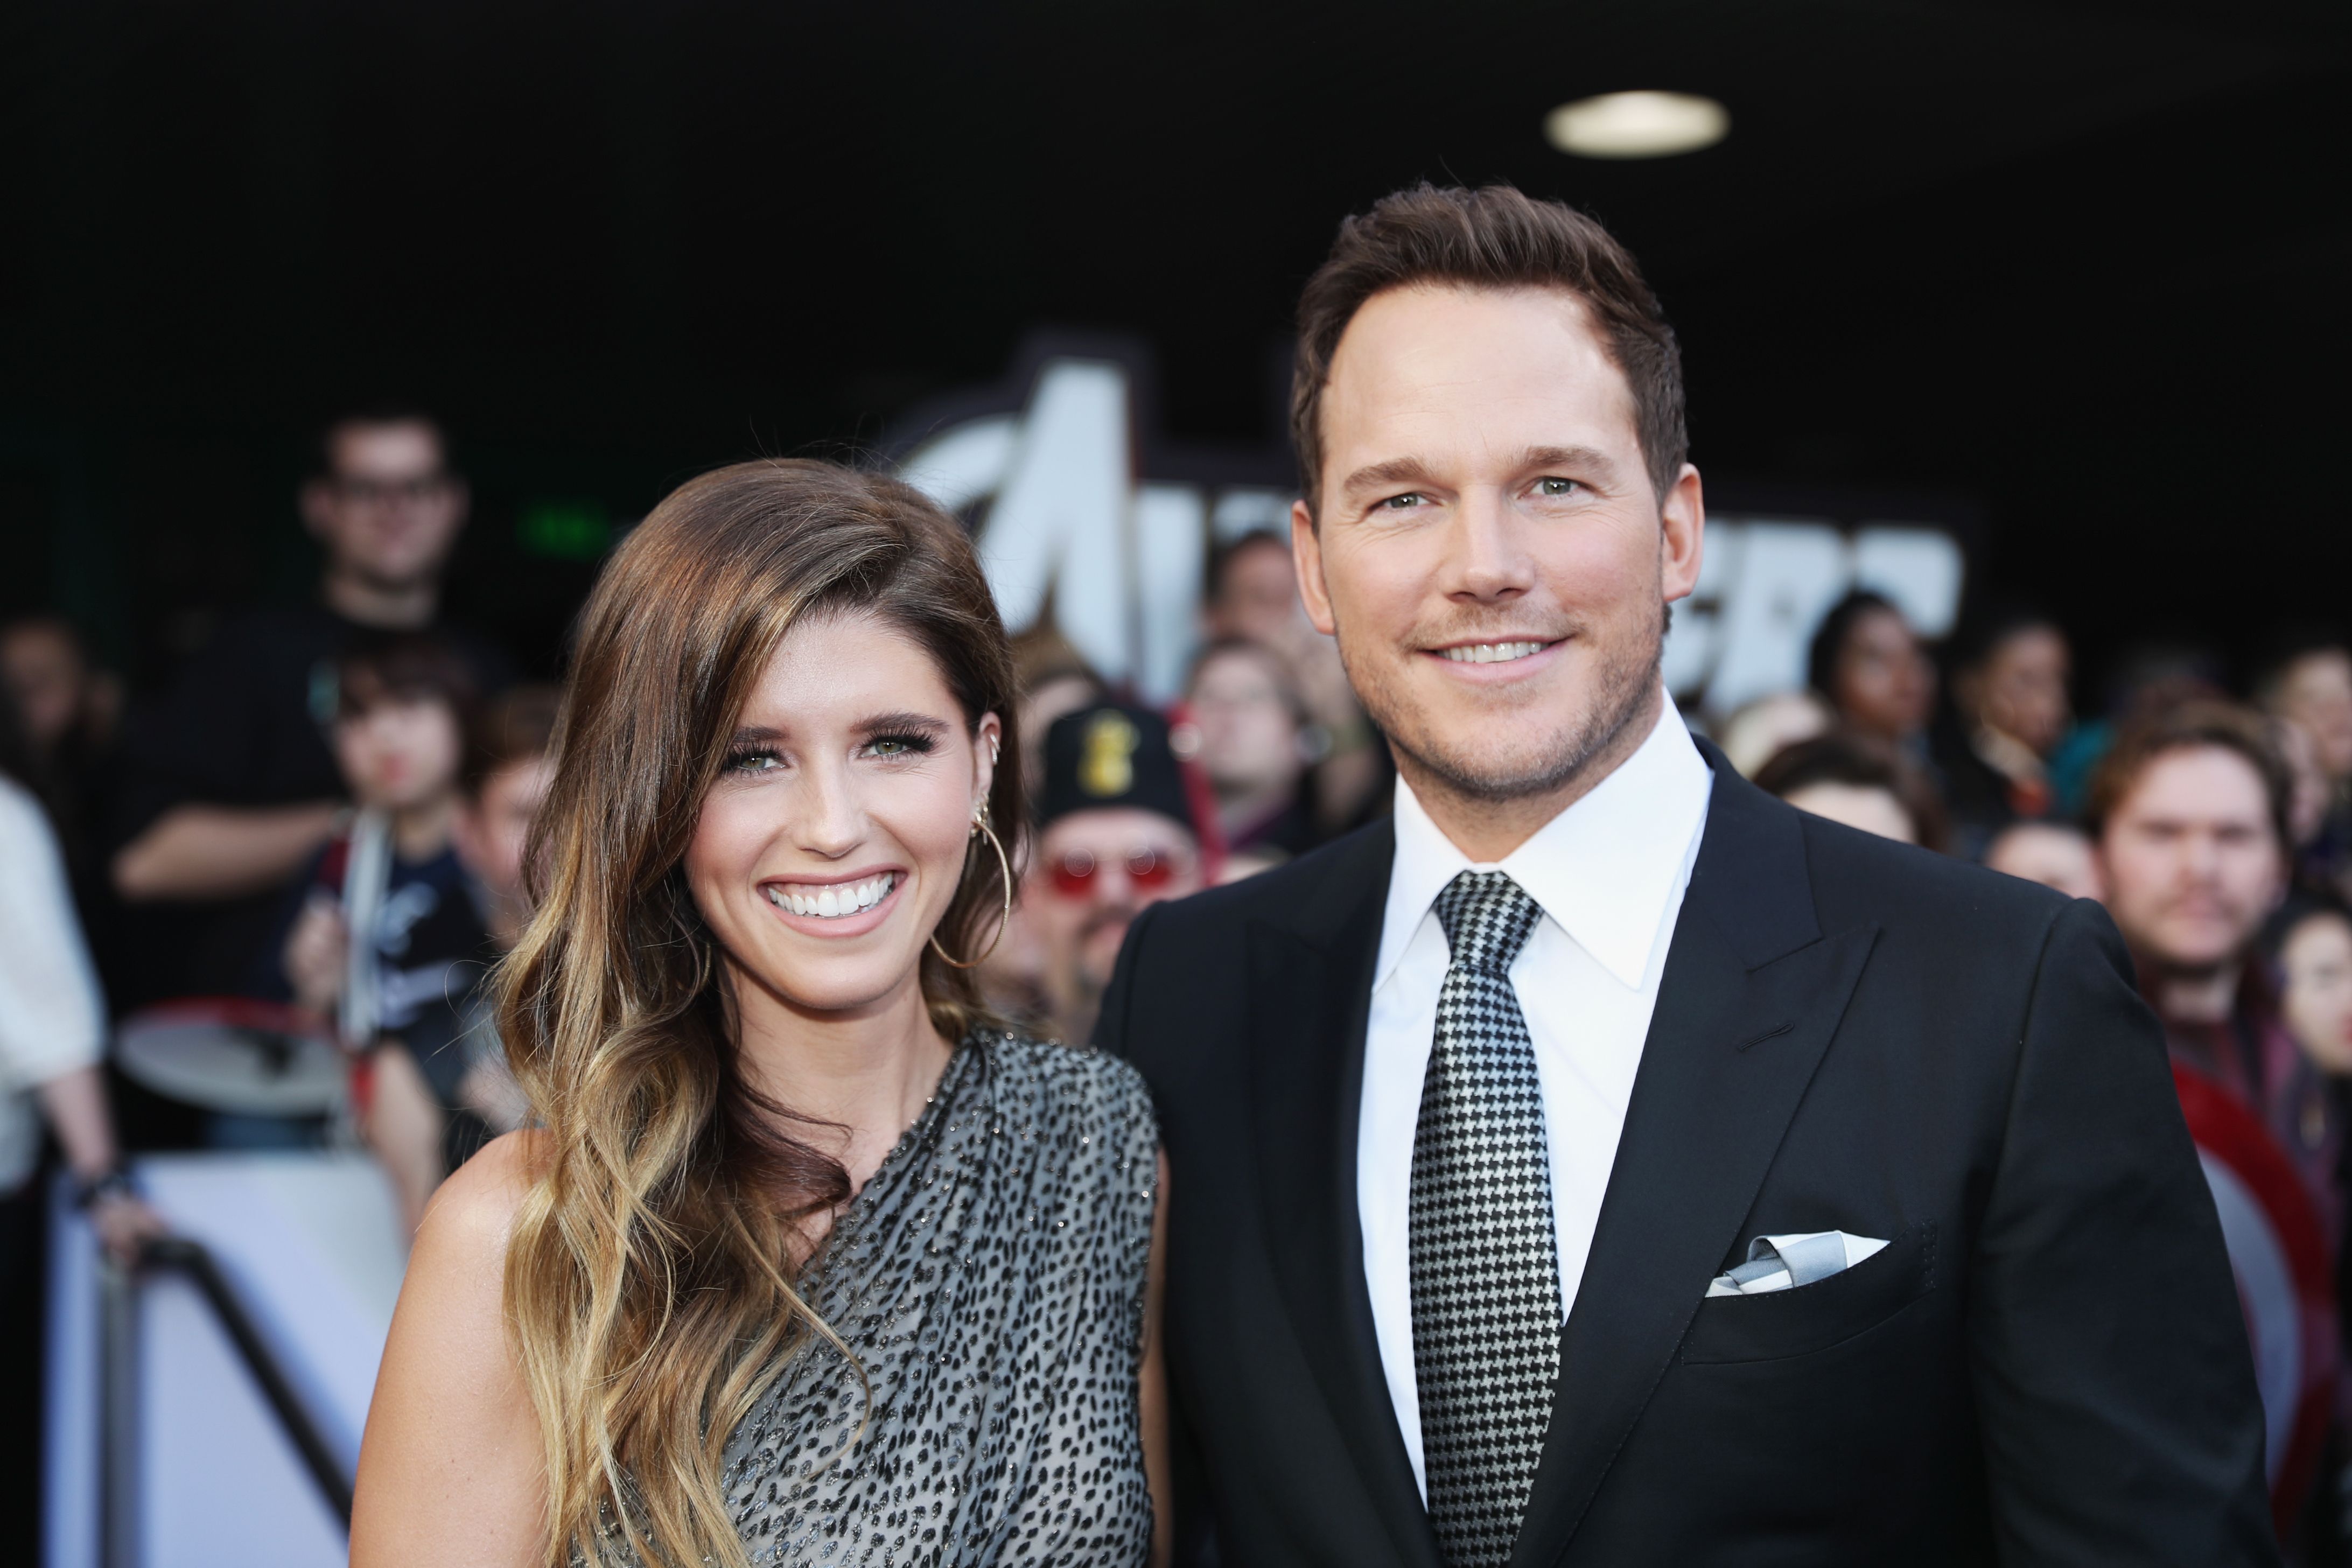 Katherine Schwarzenegger and Chris Pratt during the Los Angeles World Premiere of Marvel Studios' "Avengers: Endgame" at the Los Angeles Convention Center on April 23, 2019 in Los Angeles, California. | Source: Getty Images